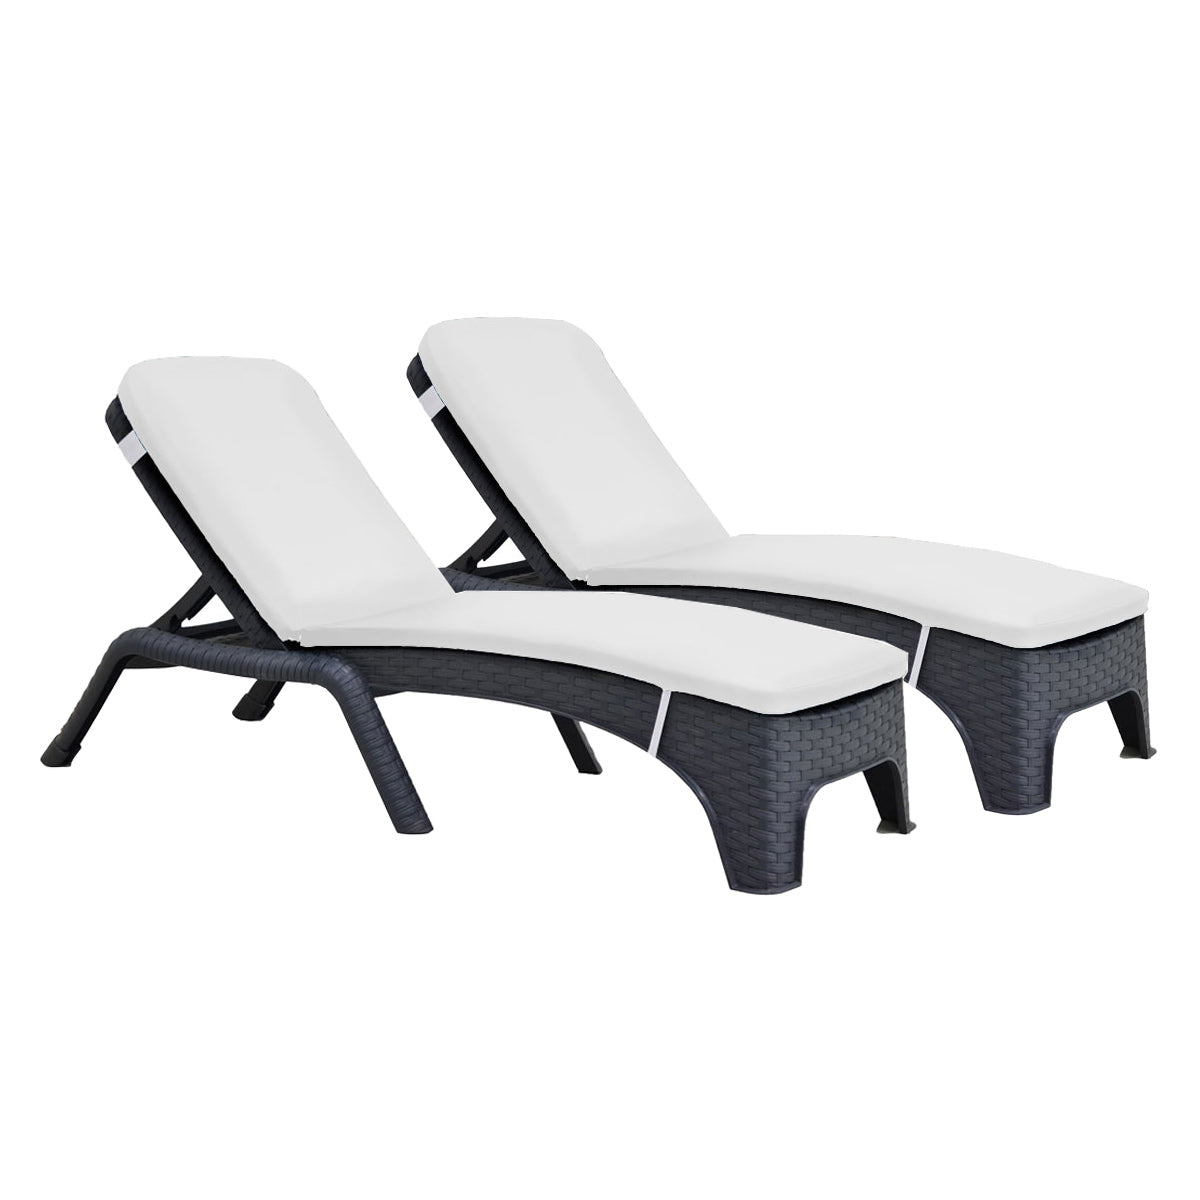 Rainbow Outdoor Roma Set of 2 Chaise Lounger-Anthracite With Cushion